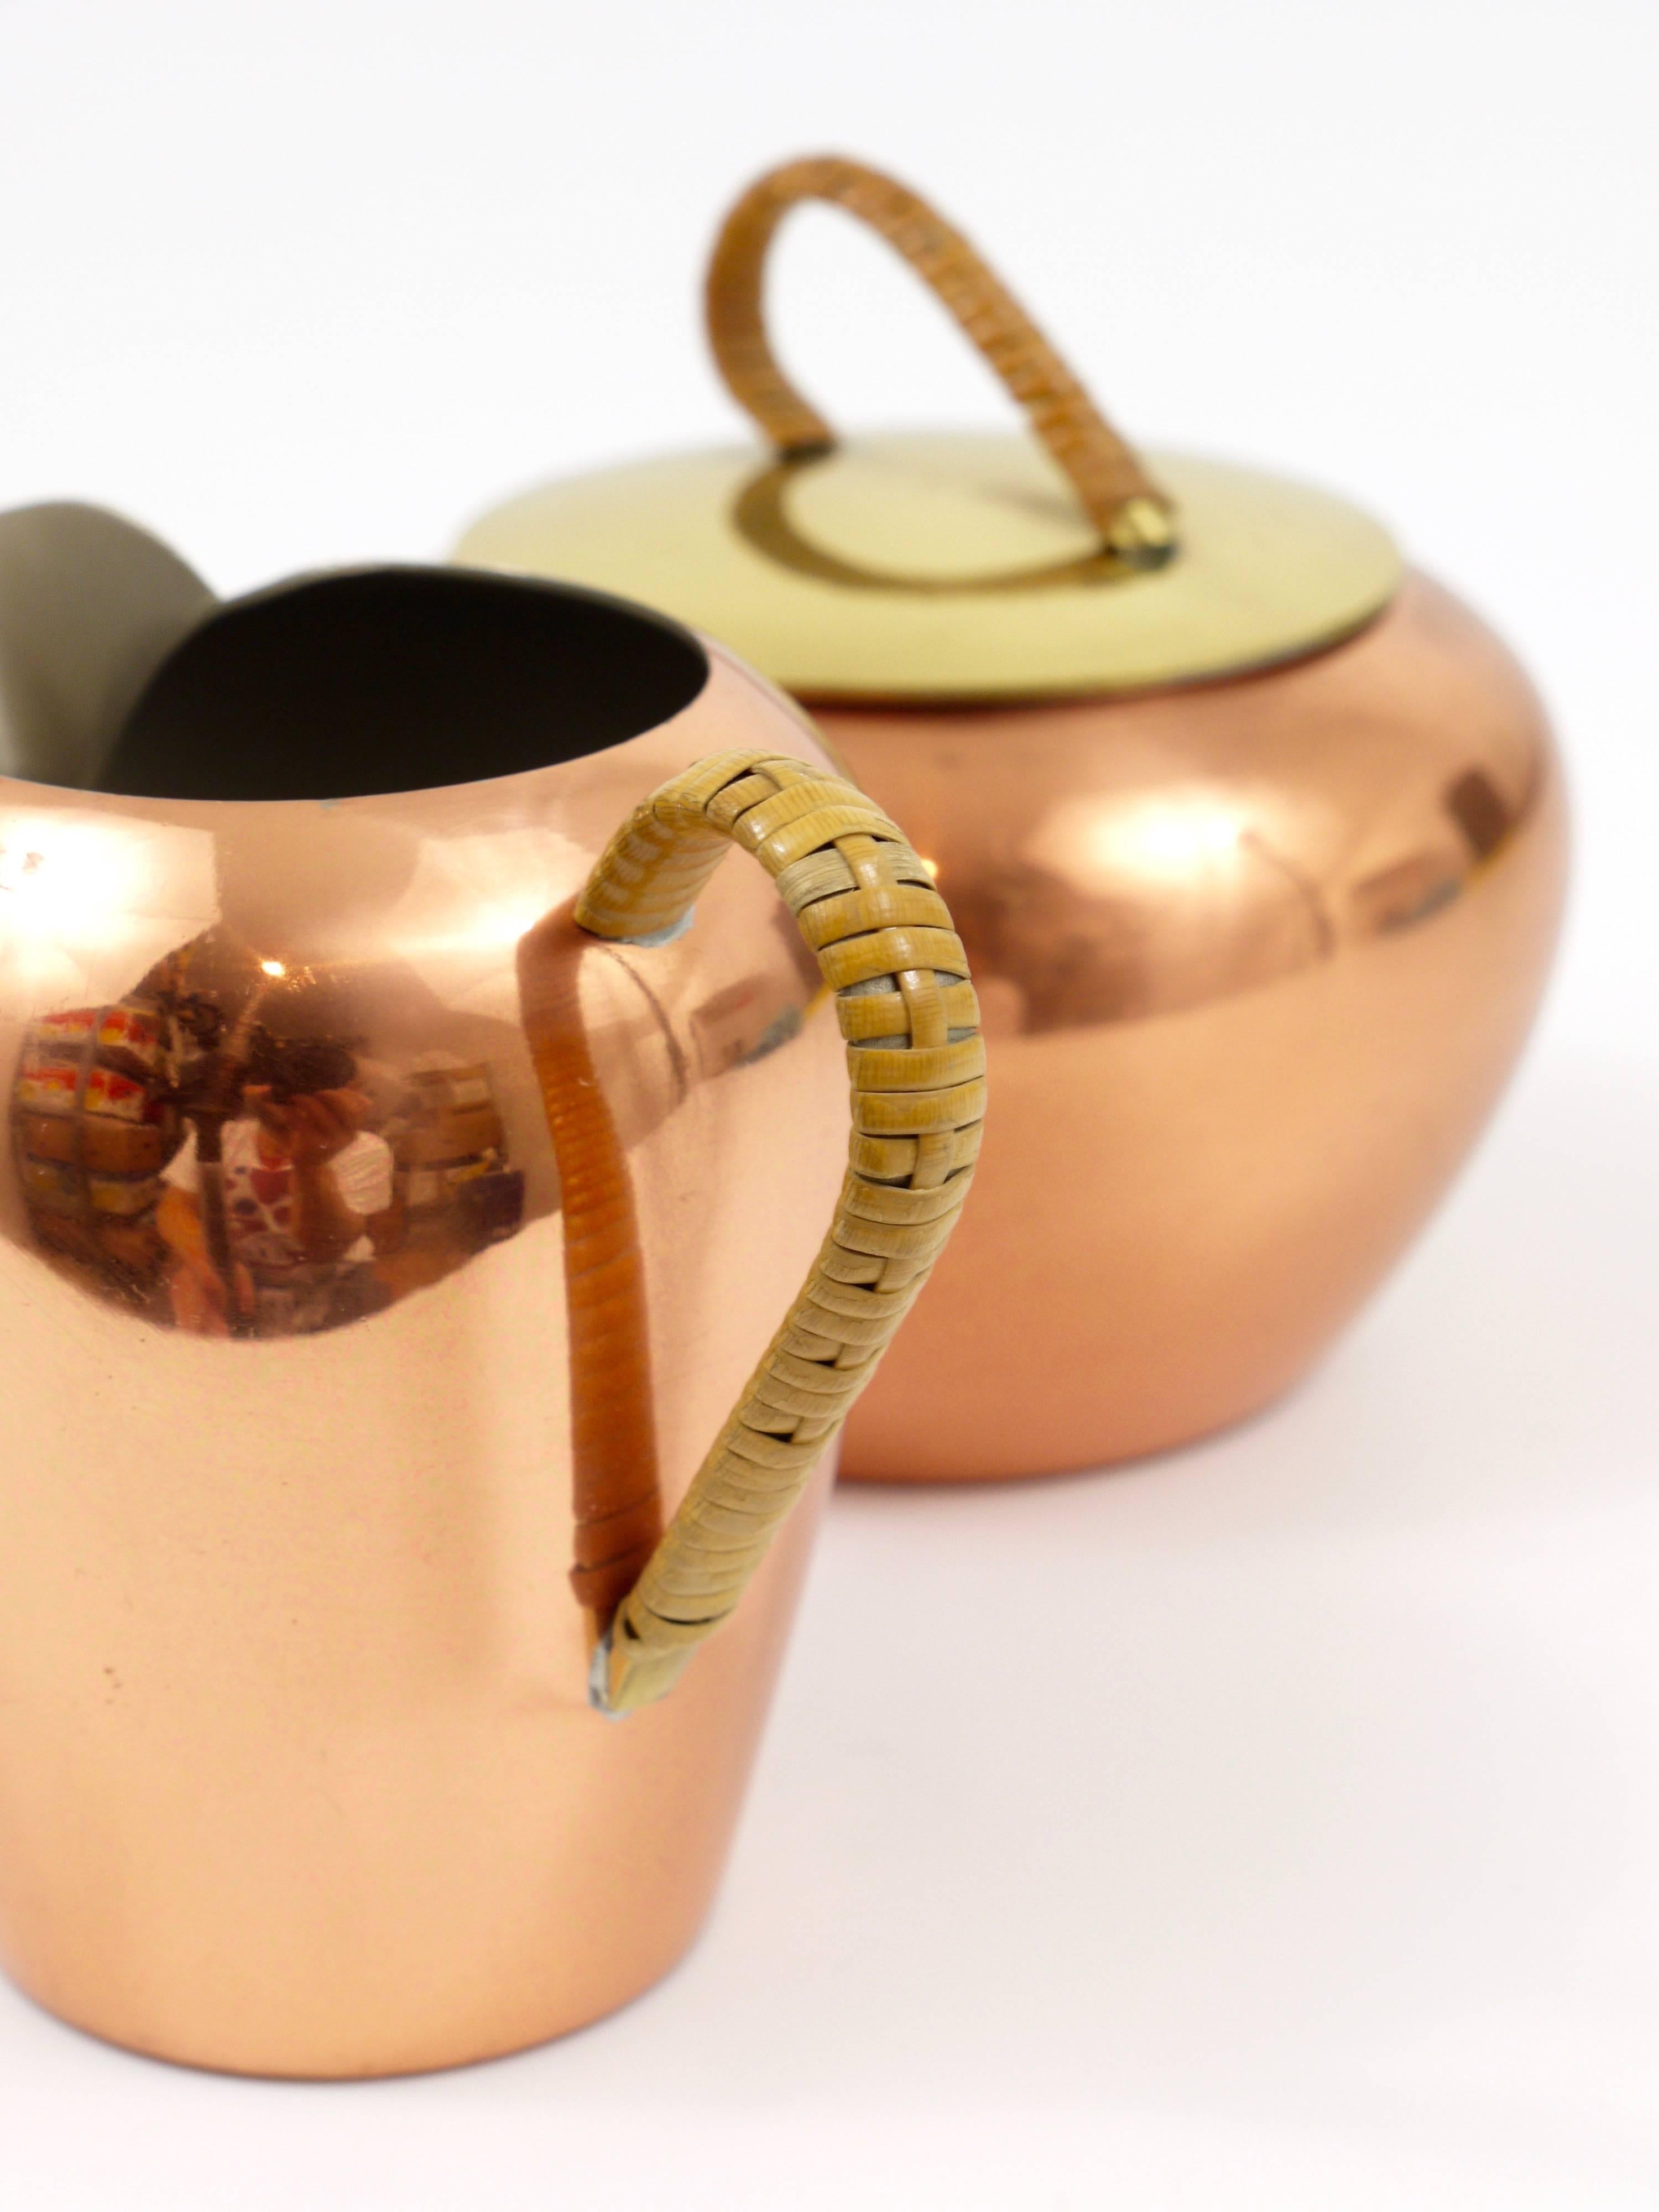 Austrian Mid-Century Copper & Brass Milk Creamer and Sugar Bowl with Lid, Austria, 1950s For Sale